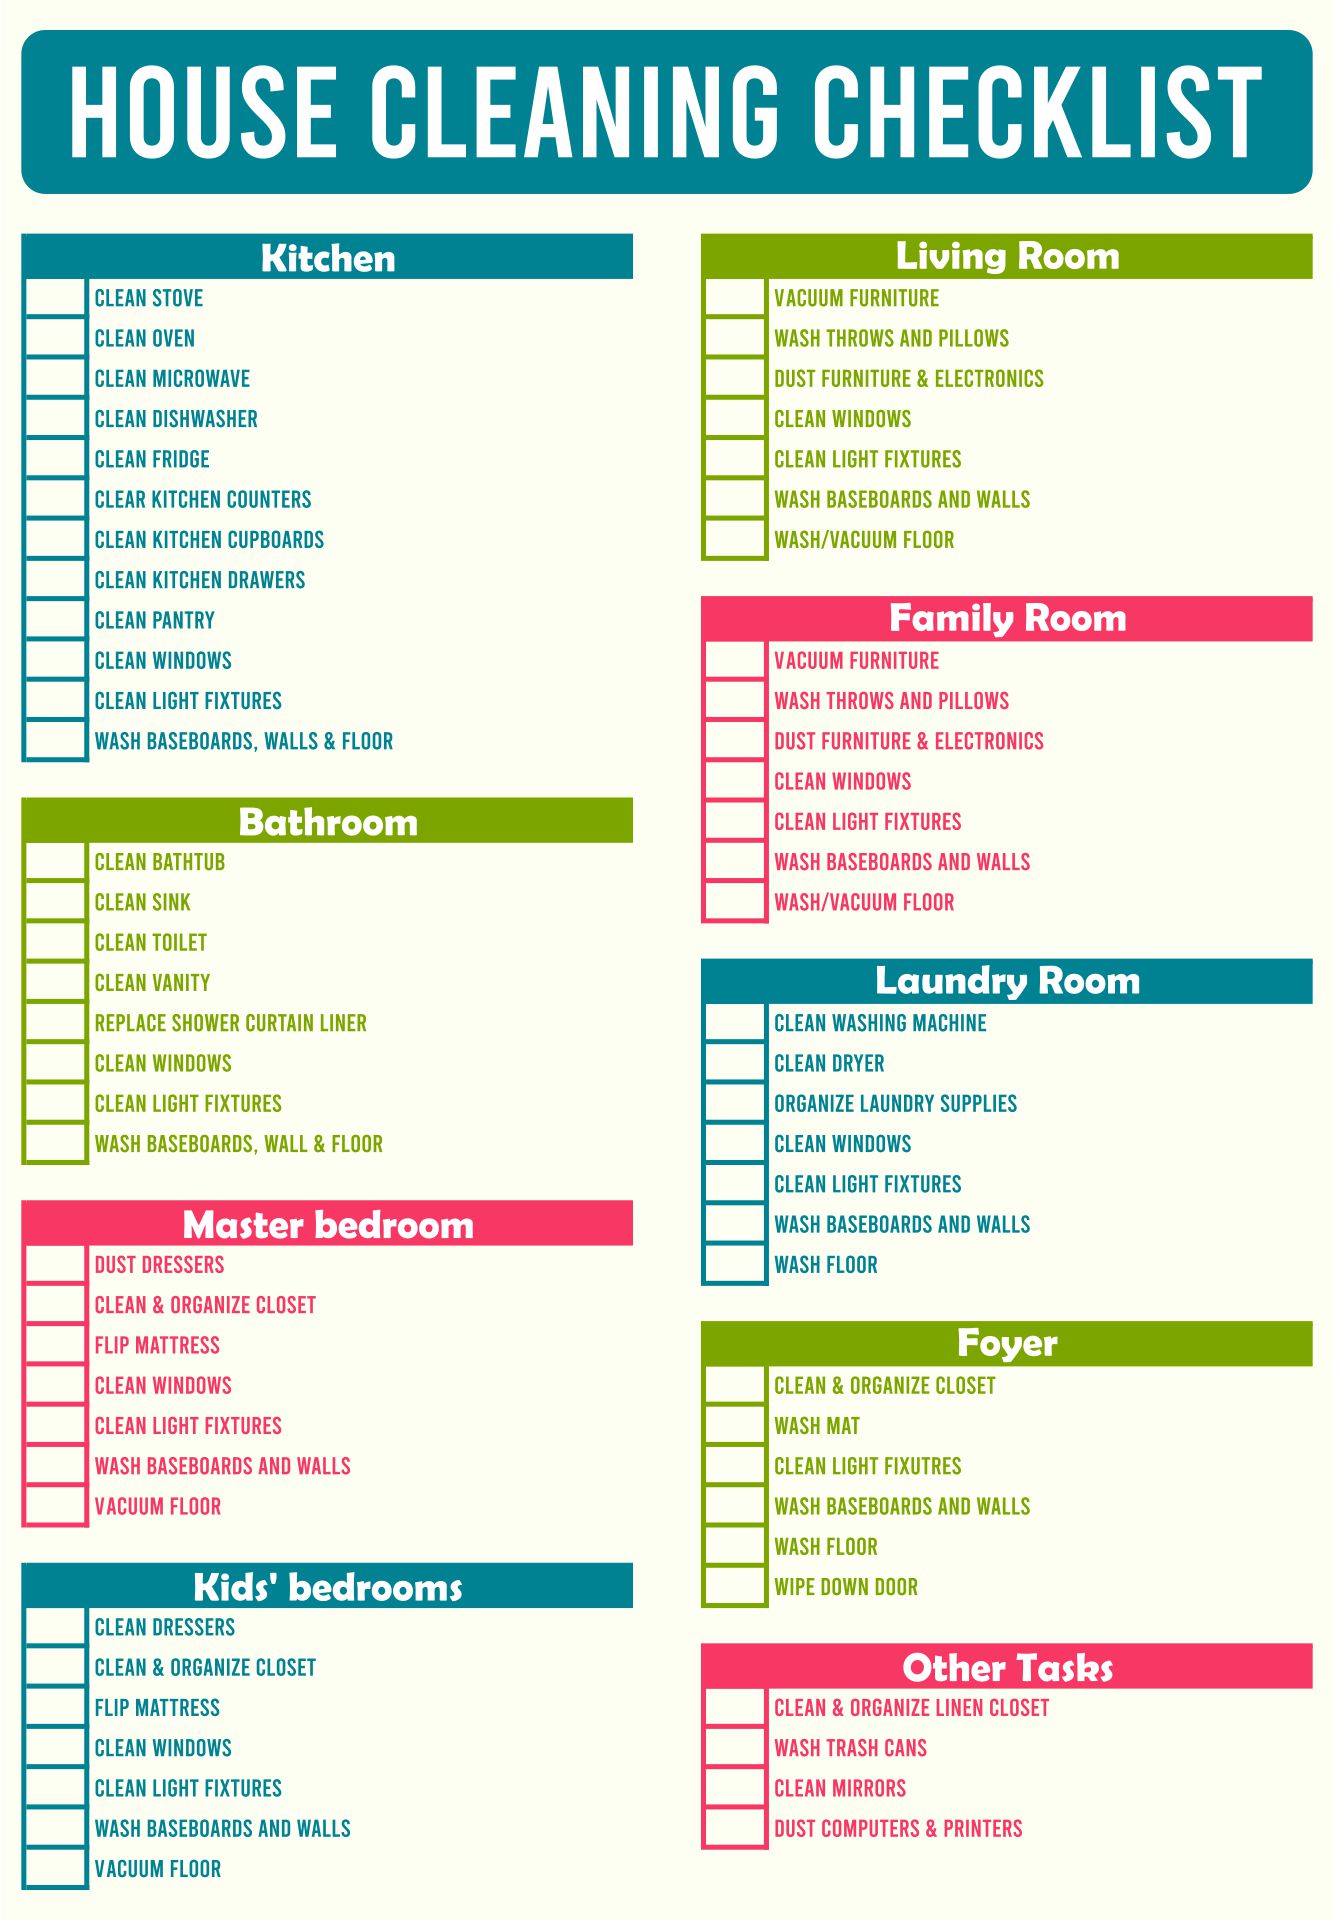 professional-house-cleaning-checklist-printable